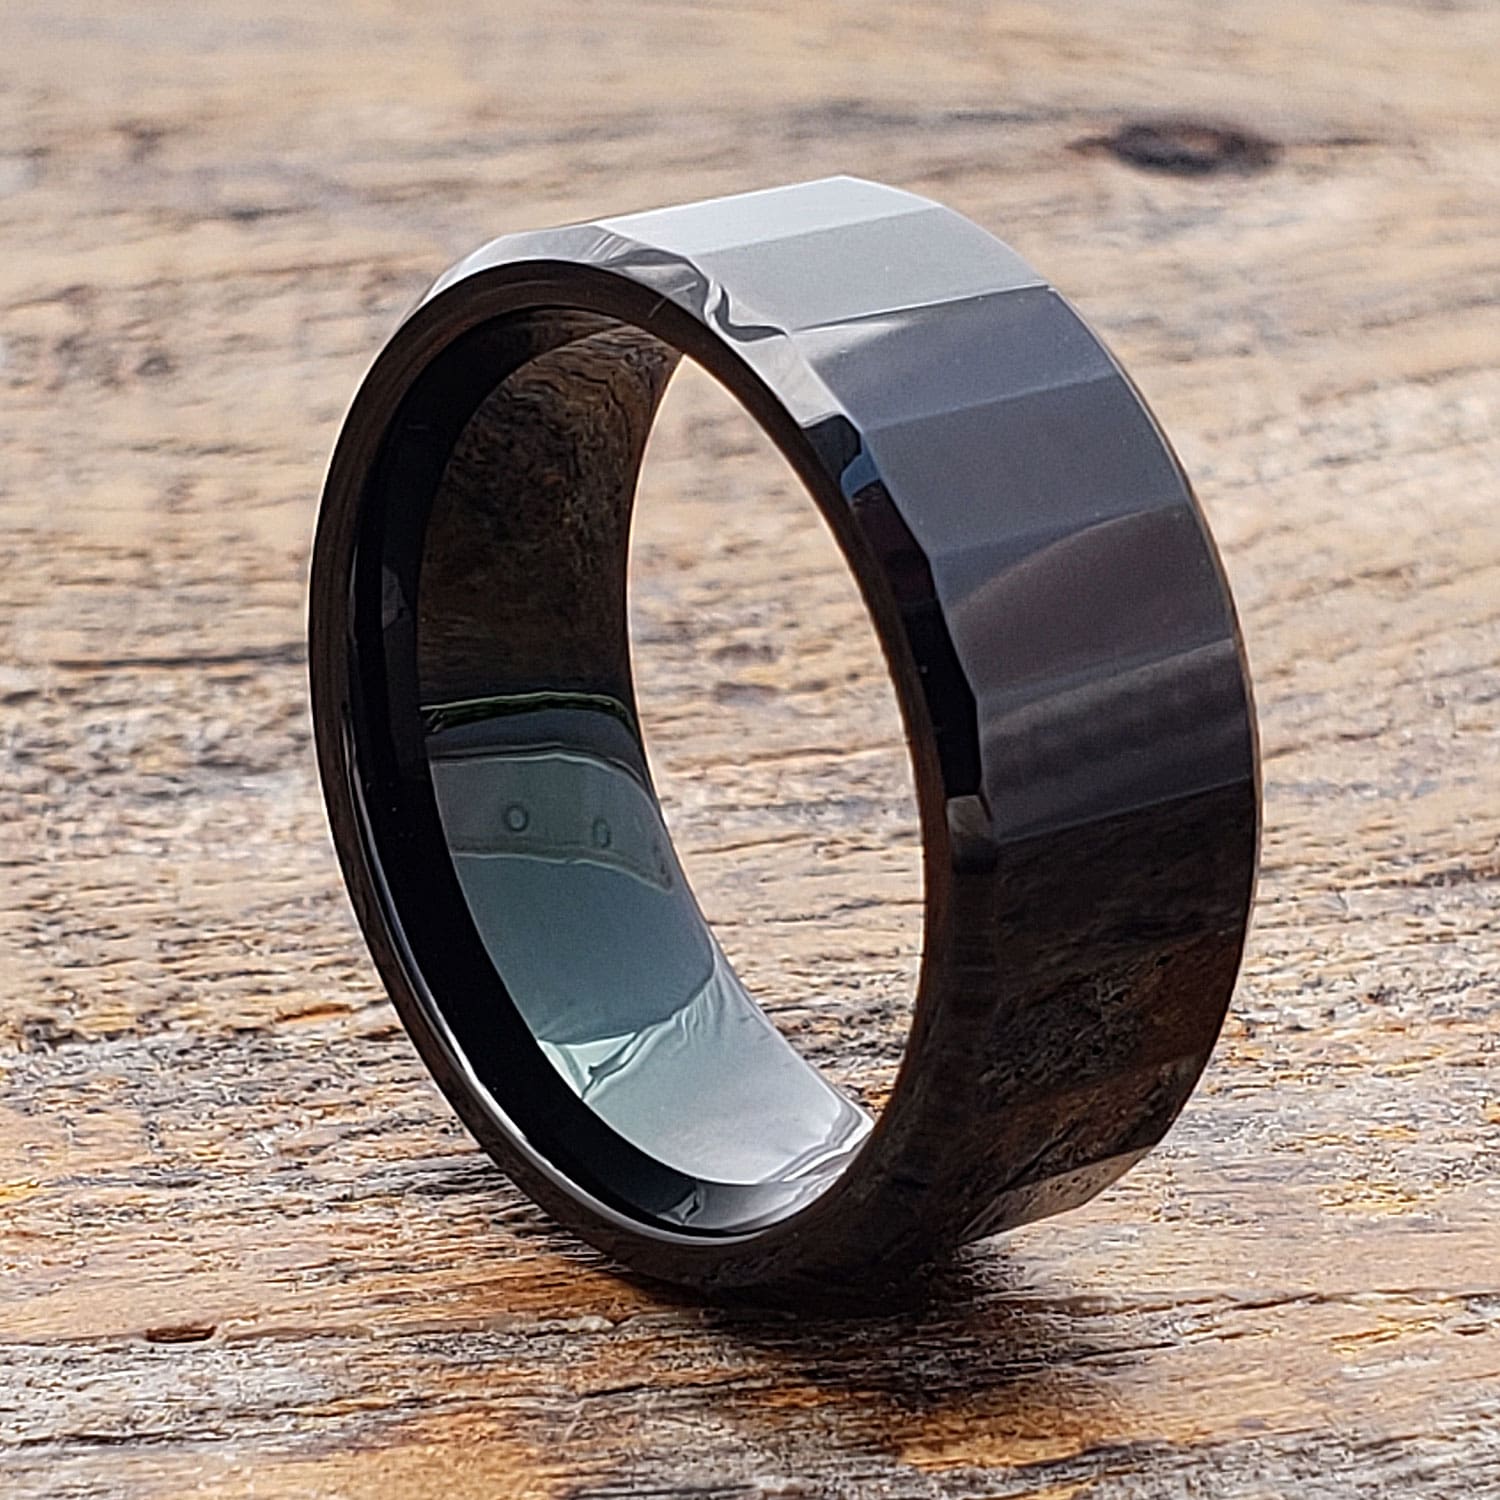 You are able to use manufacturing to look at the tungsten rings post thumbnail image